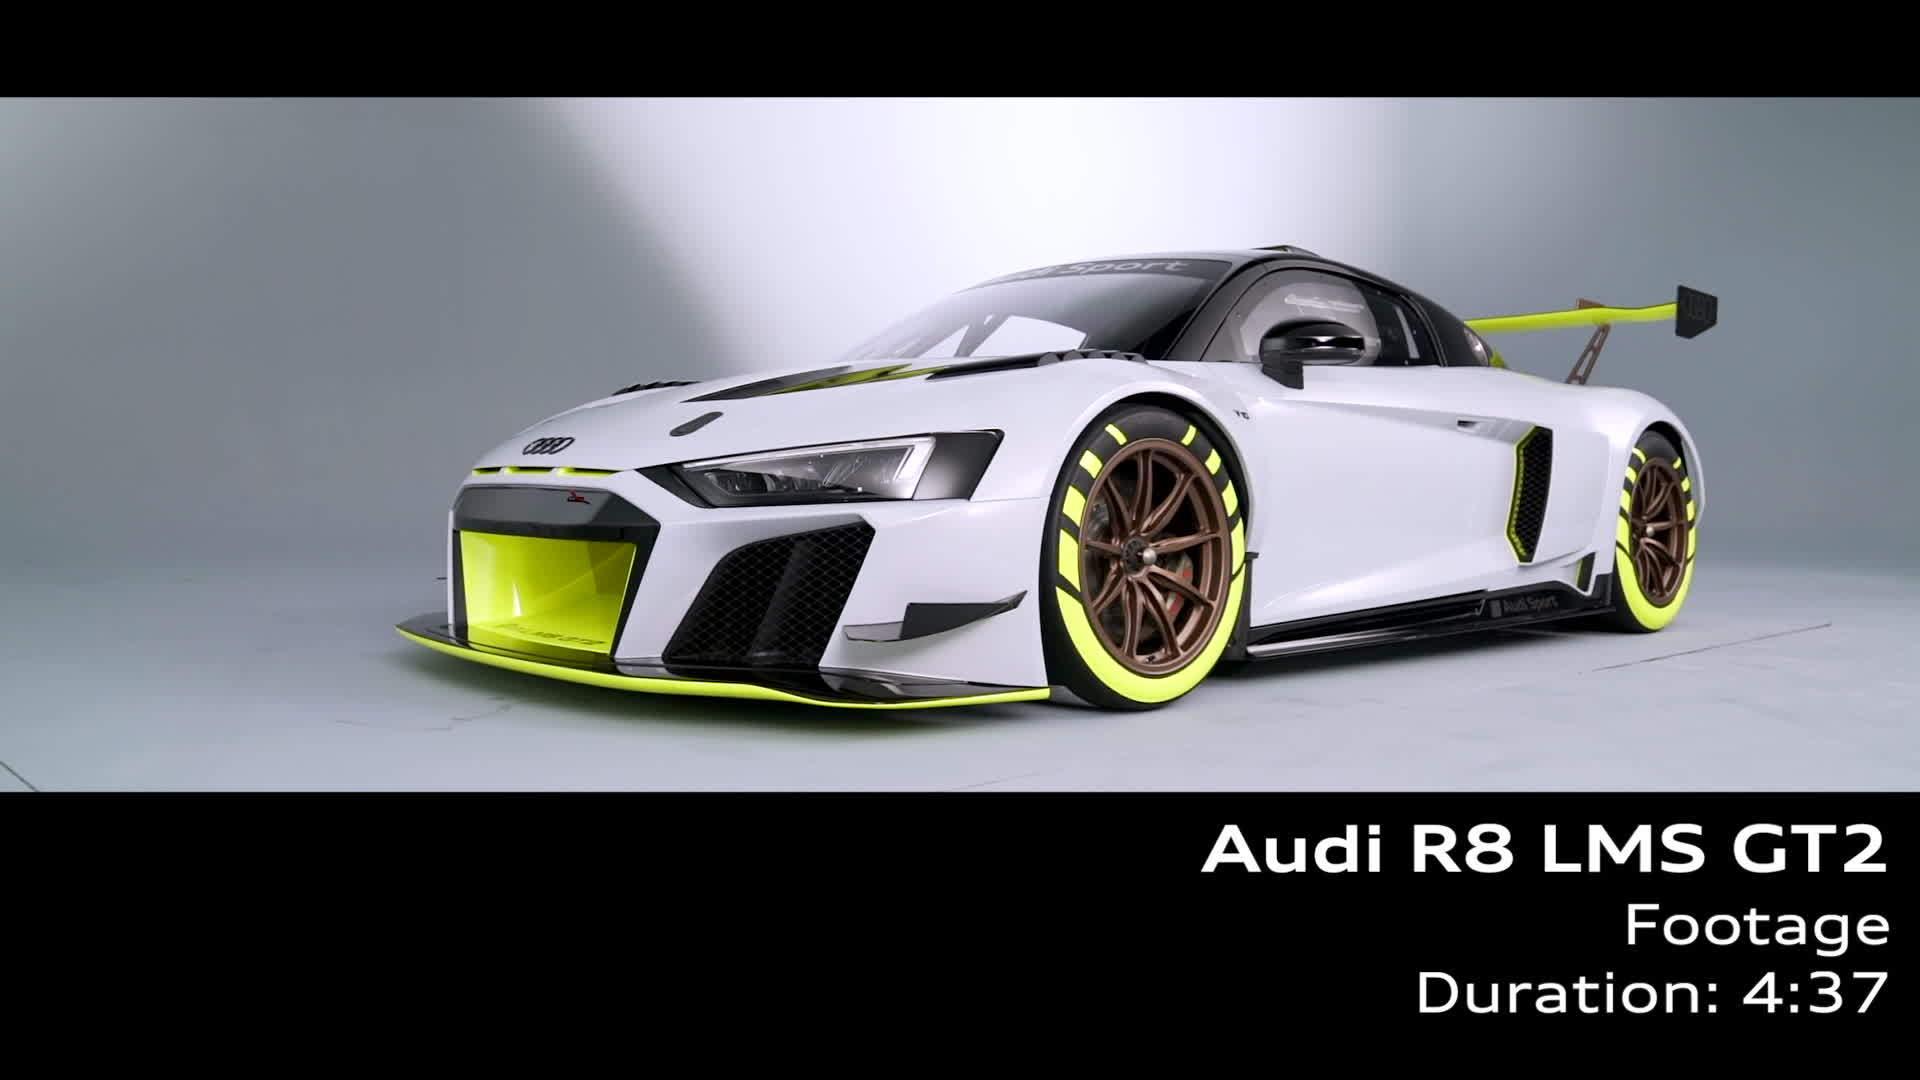 Premiere of the Audi R8 LMS GT2 at Goodwood Festival